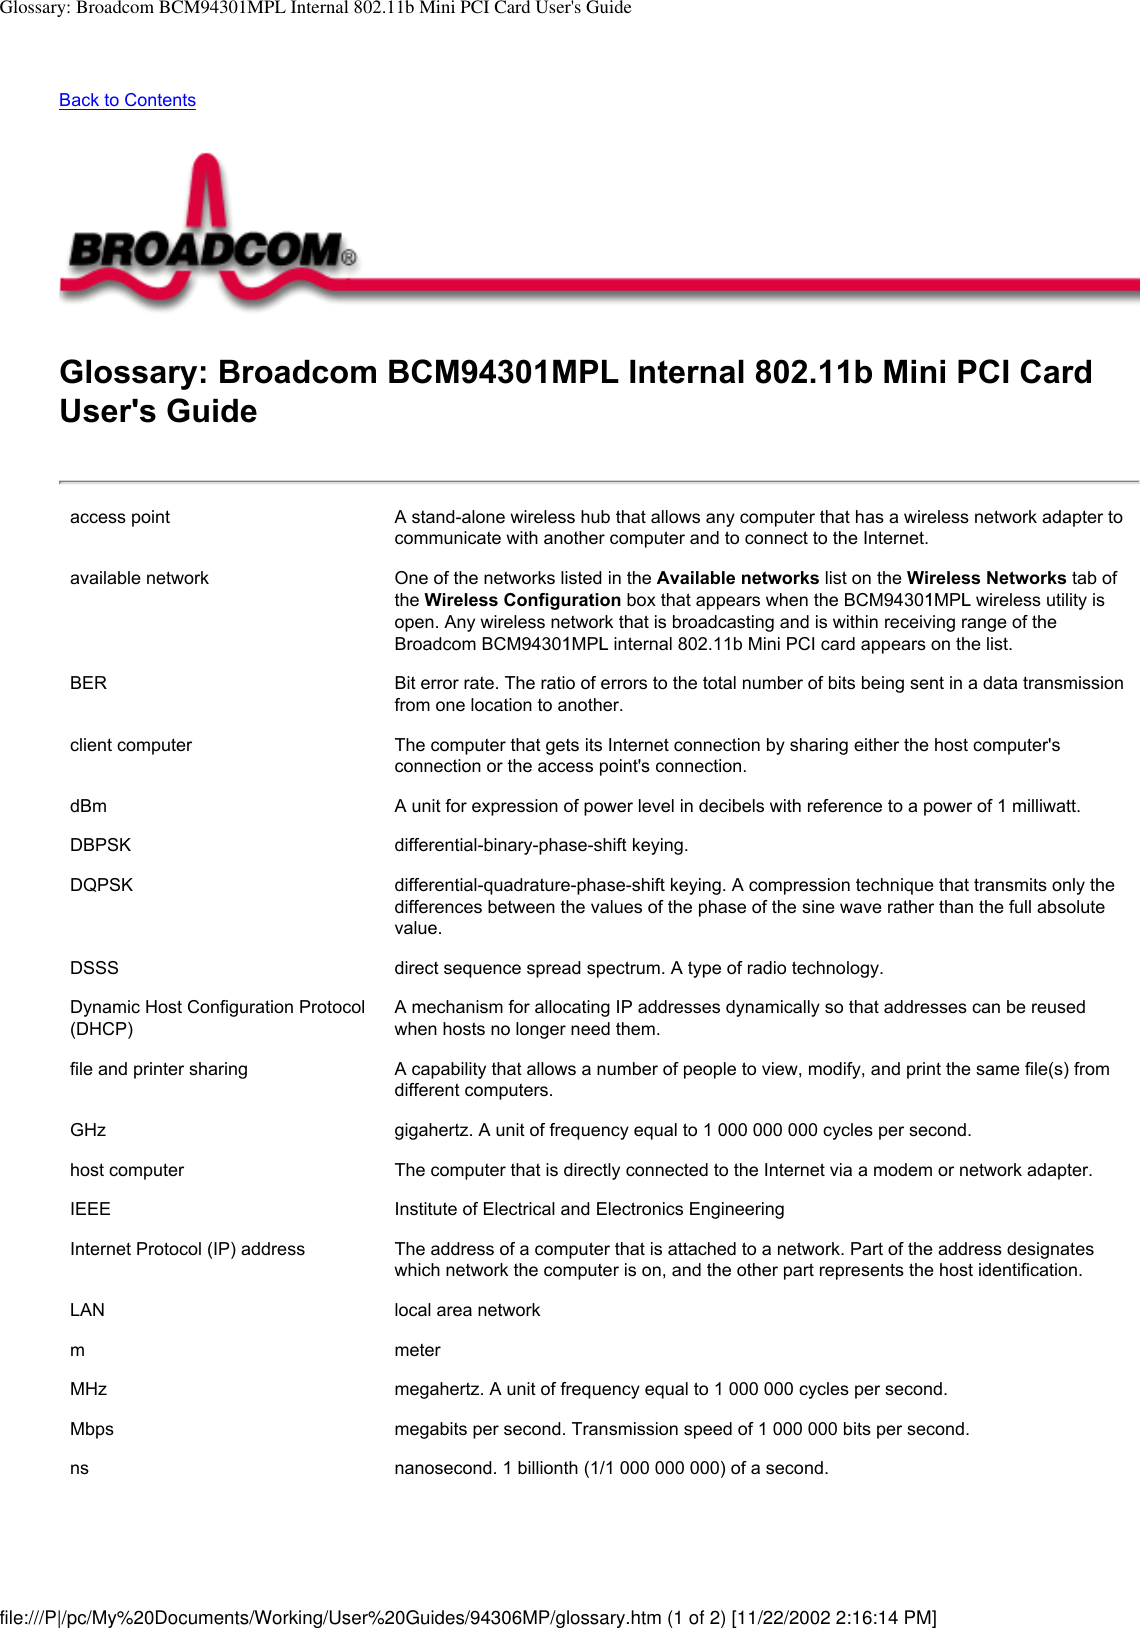 Glossary: Broadcom BCM94301MPL Internal 802.11b Mini PCI Card User&apos;s GuideBack to Contents Glossary: Broadcom BCM94301MPL Internal 802.11b Mini PCI Card User&apos;s Guideaccess point A stand-alone wireless hub that allows any computer that has a wireless network adapter to communicate with another computer and to connect to the Internet. available network One of the networks listed in the Available networks list on the Wireless Networks tab of the Wireless Configuration box that appears when the BCM94301MPL wireless utility is open. Any wireless network that is broadcasting and is within receiving range of the Broadcom BCM94301MPL internal 802.11b Mini PCI card appears on the list.BER Bit error rate. The ratio of errors to the total number of bits being sent in a data transmission from one location to another.client computer The computer that gets its Internet connection by sharing either the host computer&apos;s connection or the access point&apos;s connection.dBm A unit for expression of power level in decibels with reference to a power of 1 milliwatt.DBPSK differential-binary-phase-shift keying.DQPSK differential-quadrature-phase-shift keying. A compression technique that transmits only the differences between the values of the phase of the sine wave rather than the full absolute value.DSSS direct sequence spread spectrum. A type of radio technology.Dynamic Host Configuration Protocol (DHCP) A mechanism for allocating IP addresses dynamically so that addresses can be reused when hosts no longer need them.file and printer sharing A capability that allows a number of people to view, modify, and print the same file(s) from different computers.GHz gigahertz. A unit of frequency equal to 1 000 000 000 cycles per second. host computer The computer that is directly connected to the Internet via a modem or network adapter.IEEE Institute of Electrical and Electronics EngineeringInternet Protocol (IP) address The address of a computer that is attached to a network. Part of the address designates which network the computer is on, and the other part represents the host identification.LAN local area networkm meterMHz megahertz. A unit of frequency equal to 1 000 000 cycles per second.Mbps megabits per second. Transmission speed of 1 000 000 bits per second.ns nanosecond. 1 billionth (1/1 000 000 000) of a second.file:///P|/pc/My%20Documents/Working/User%20Guides/94306MP/glossary.htm (1 of 2) [11/22/2002 2:16:14 PM]